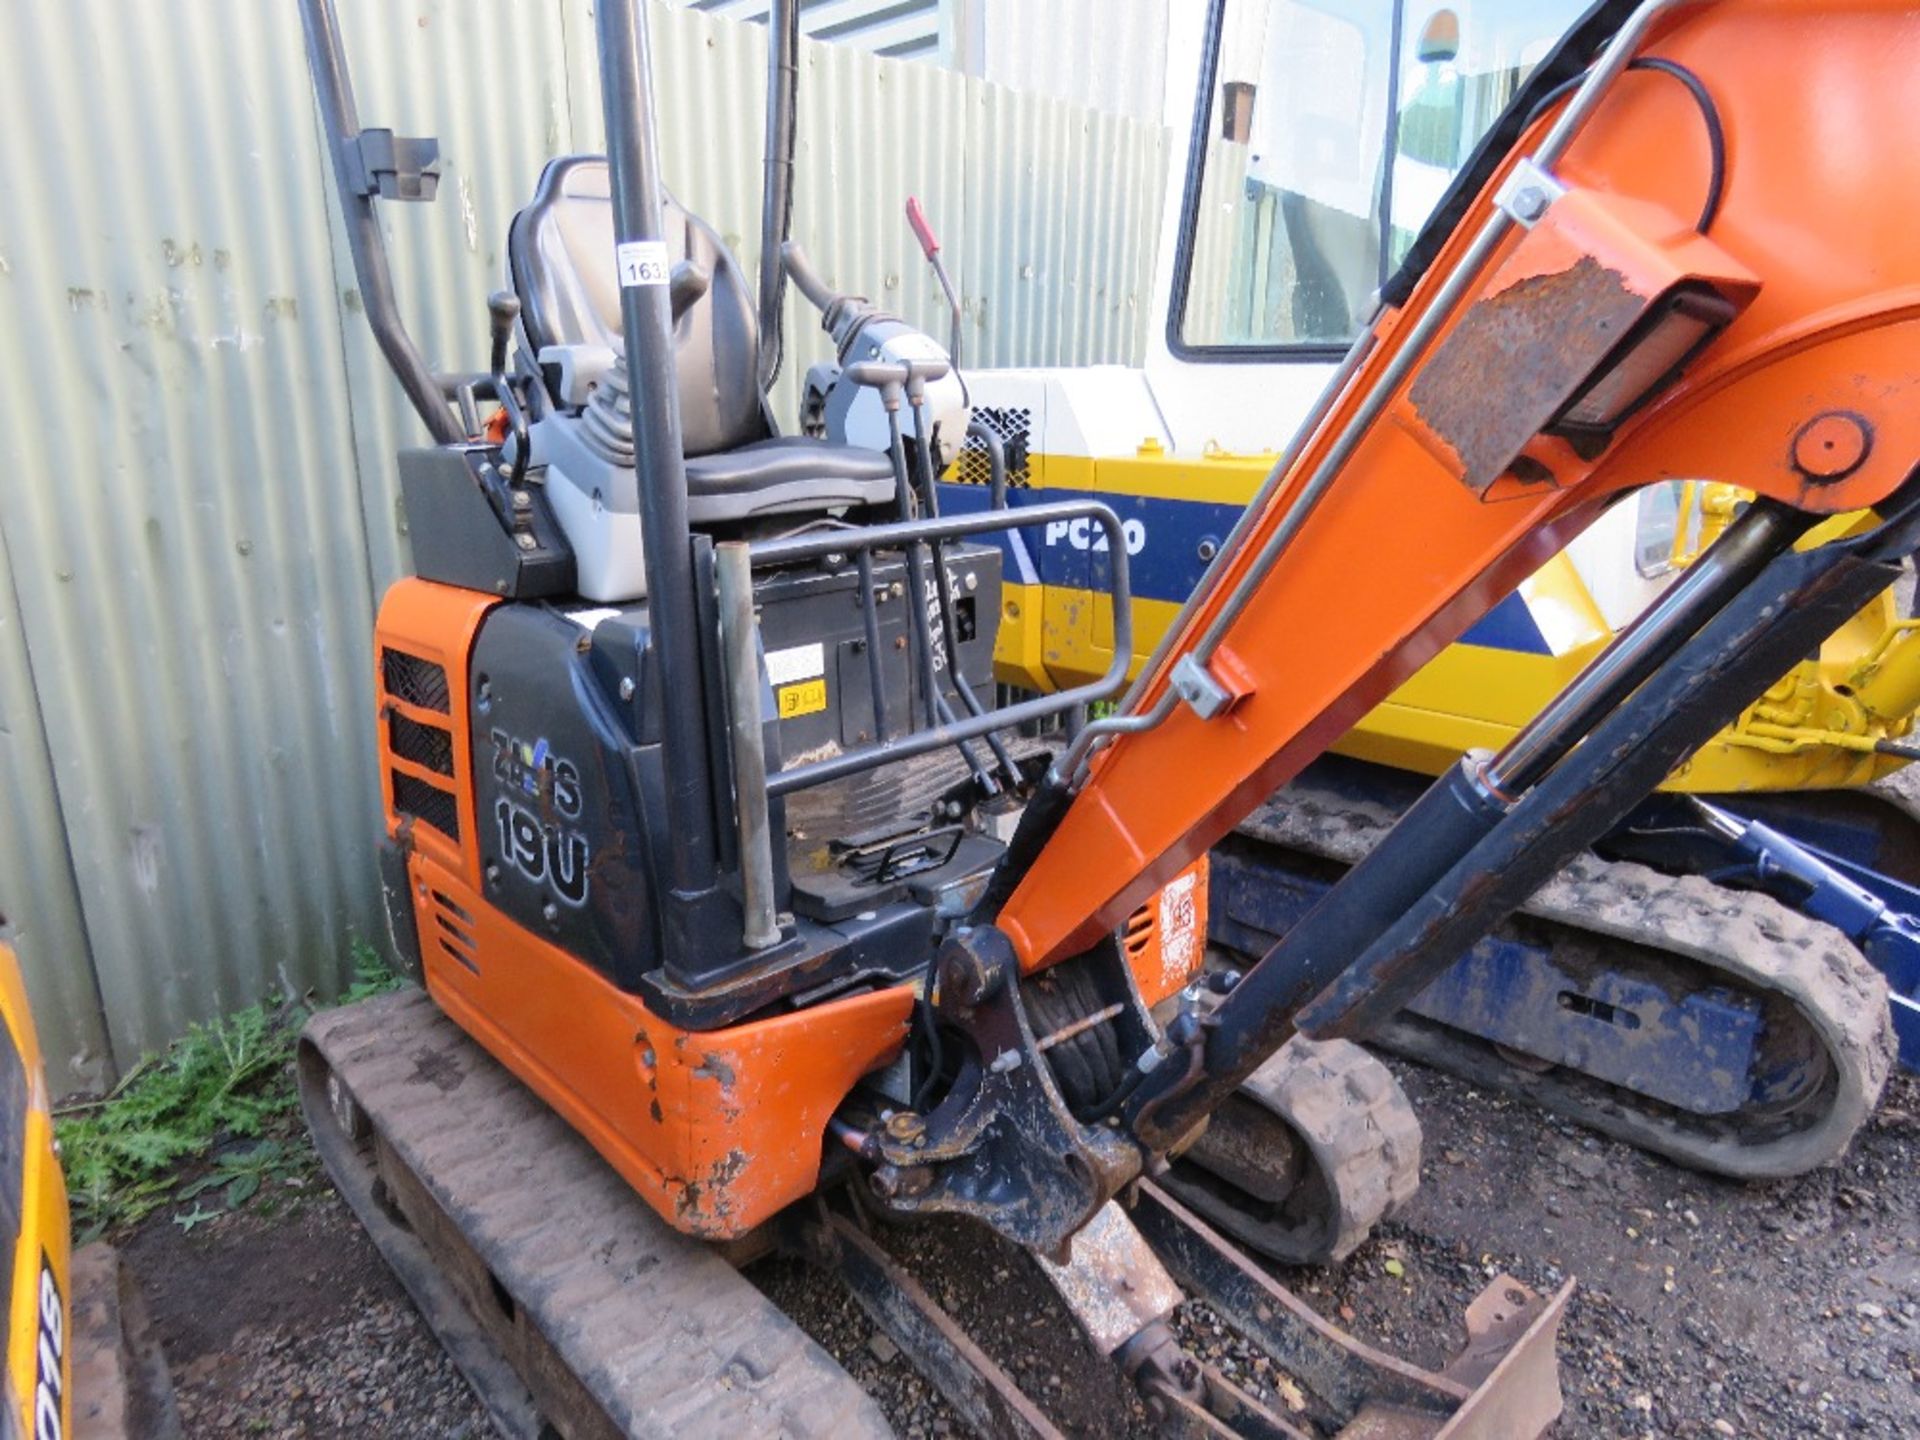 HITACHI ZAXIS 19U RUBBER TRACKED MINI EXCAVATOR, YEAR 2017 BUILD, WITH 2 BUCKETS, 2822 RECORDED HOUR - Image 6 of 13